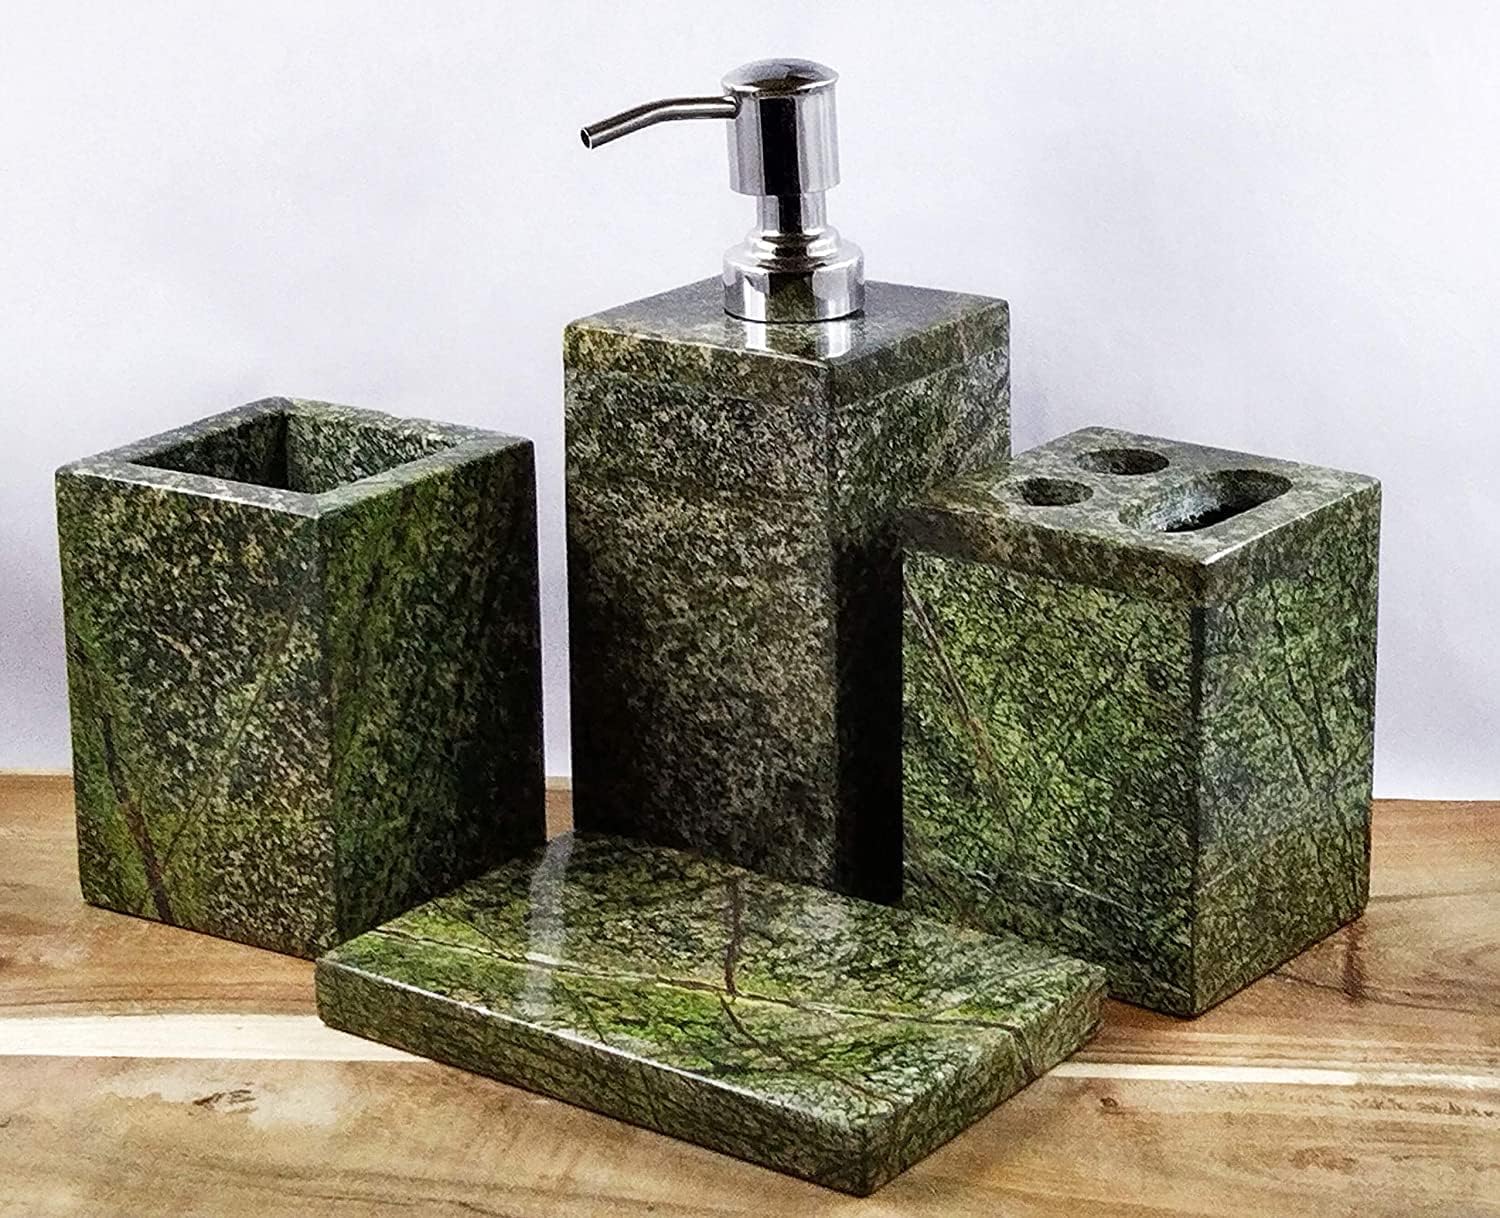 Green Forest Marble Bath Set for Luxury Bathroom, Bathroom Accessories Set of Marble, Soap Dispenser Set with for Home Decor, Set of 4 Pcs